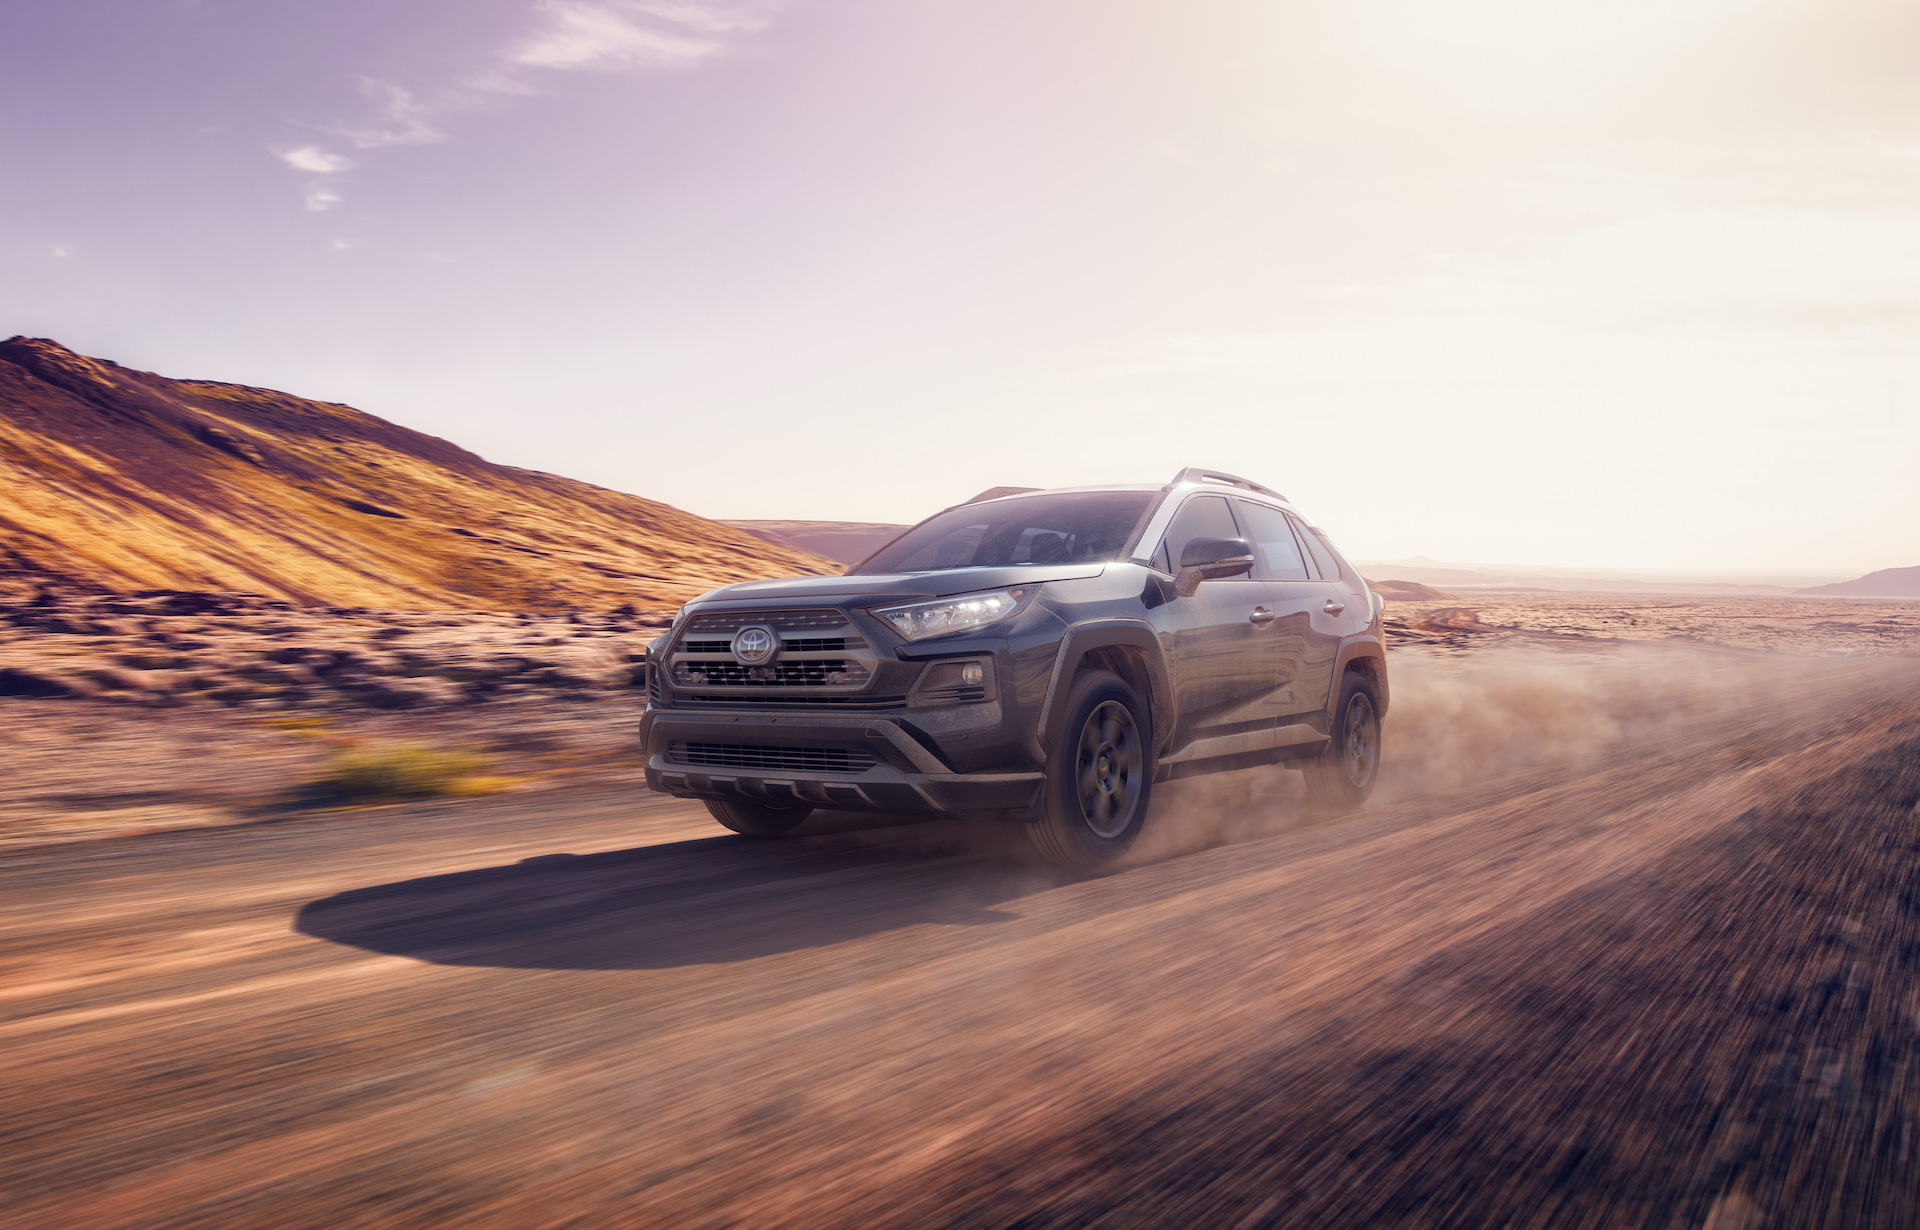 The Rav4 is Toyota's family crossover, with a favorable safety rating, an efficient engine, and a reasonable price, it is a major seller for the brand.